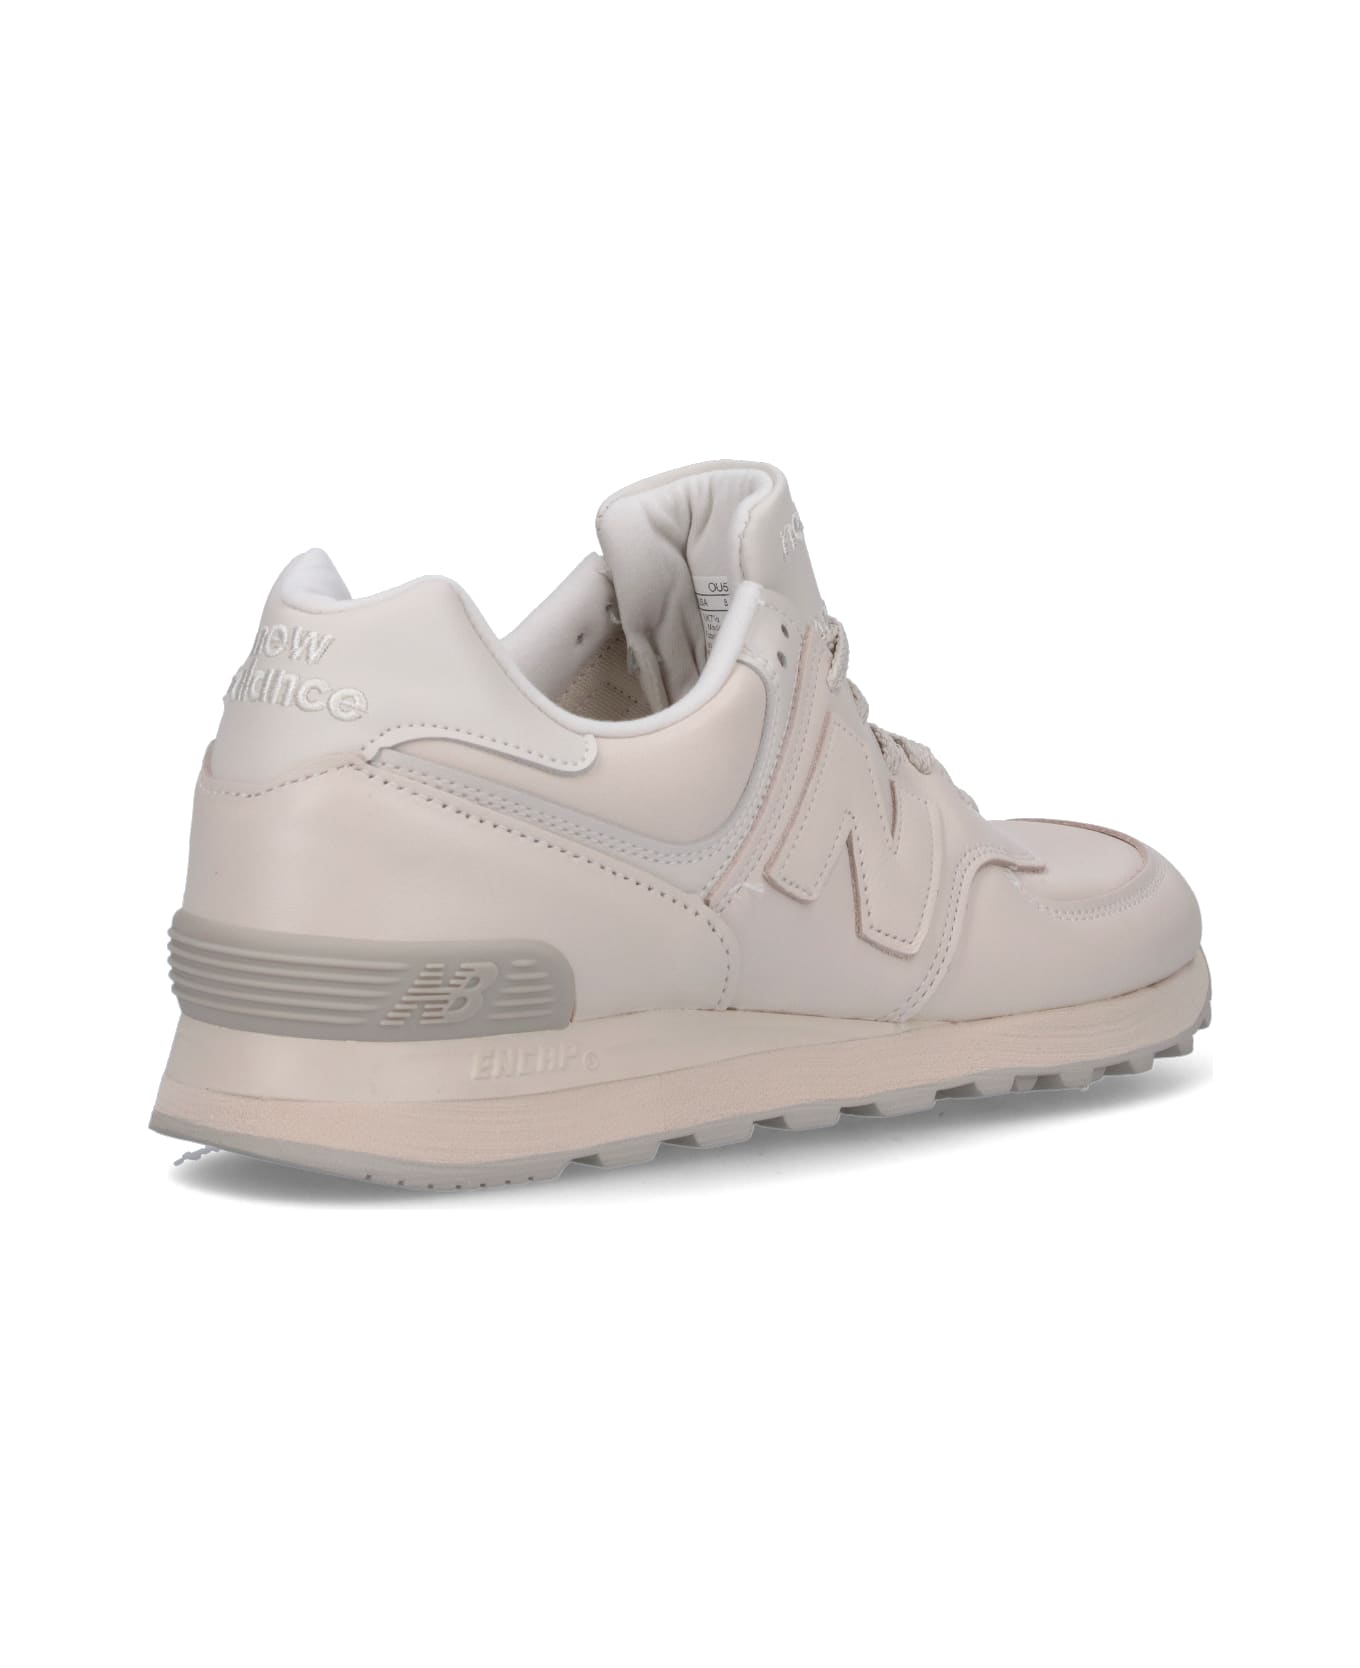 New Balance 'made In Uk 576' Sneakers - White